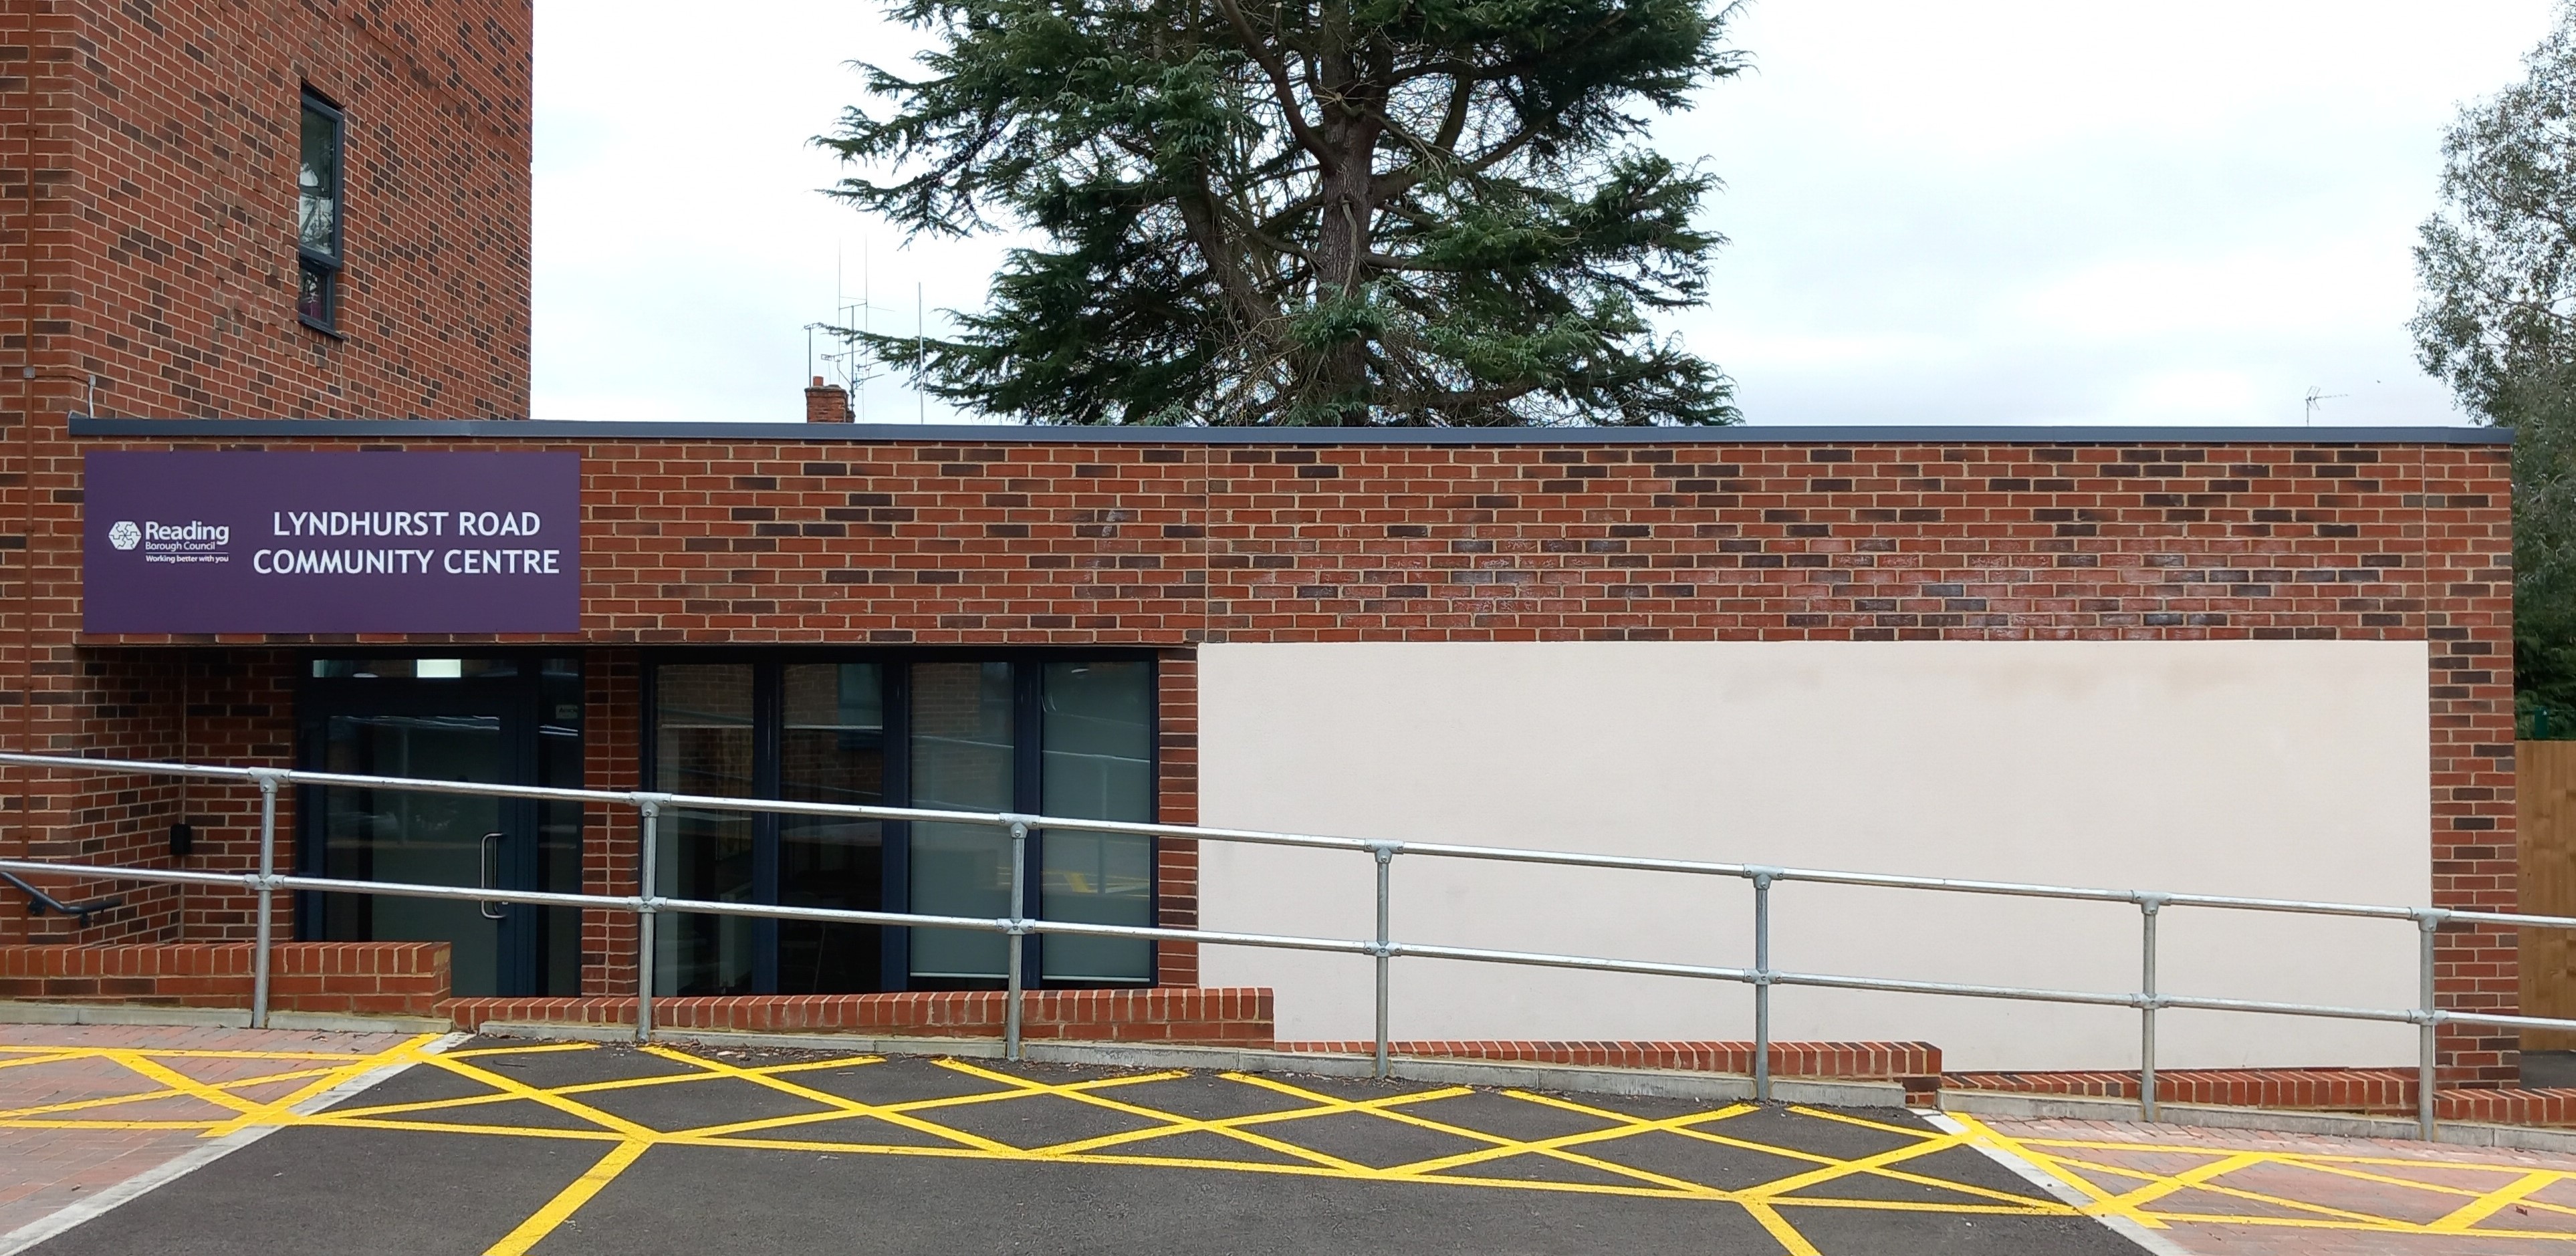 The picture shows the exterior of the Lyndhurst Road community centre.